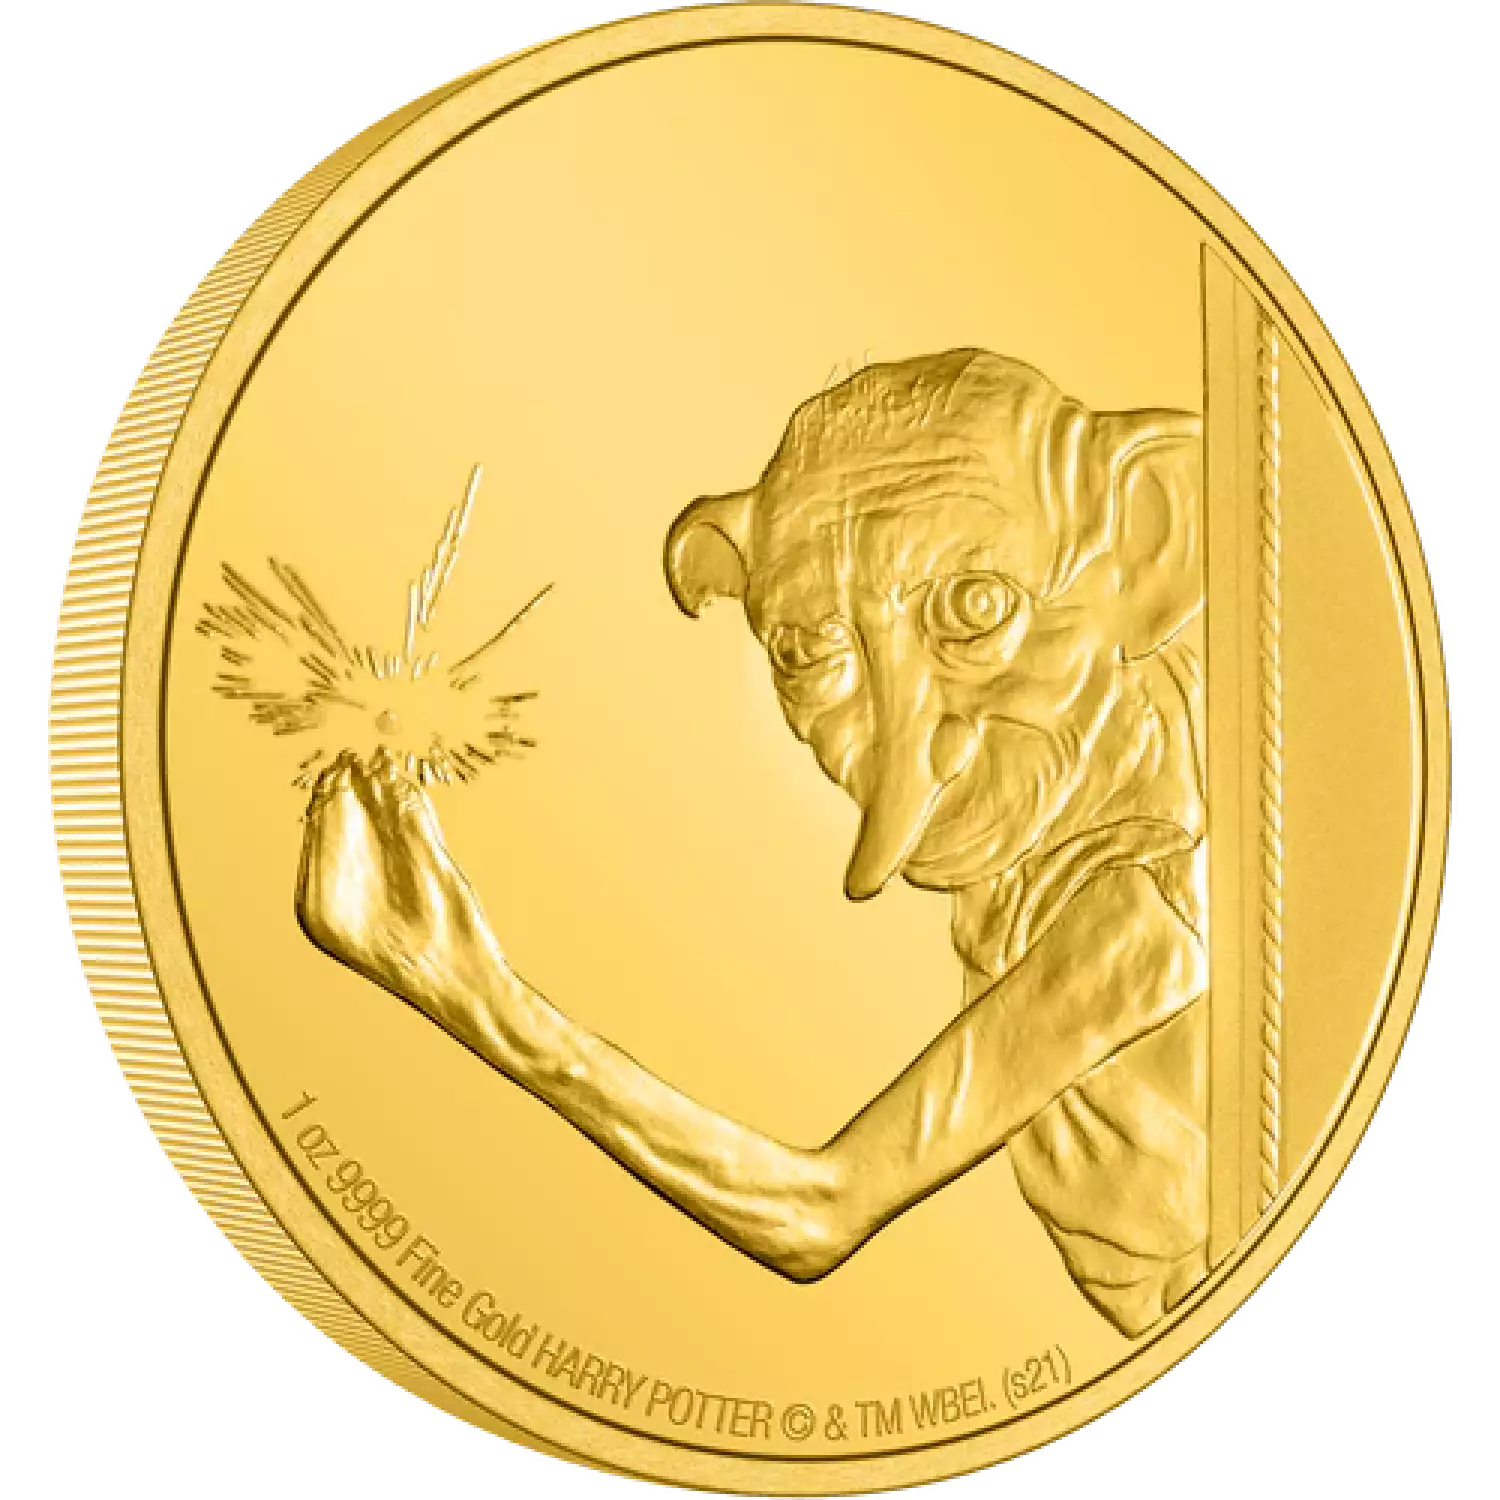 HAPPRY POTTER- 2021 1oz Classic Dobby The House Elf Gold Coin (2)